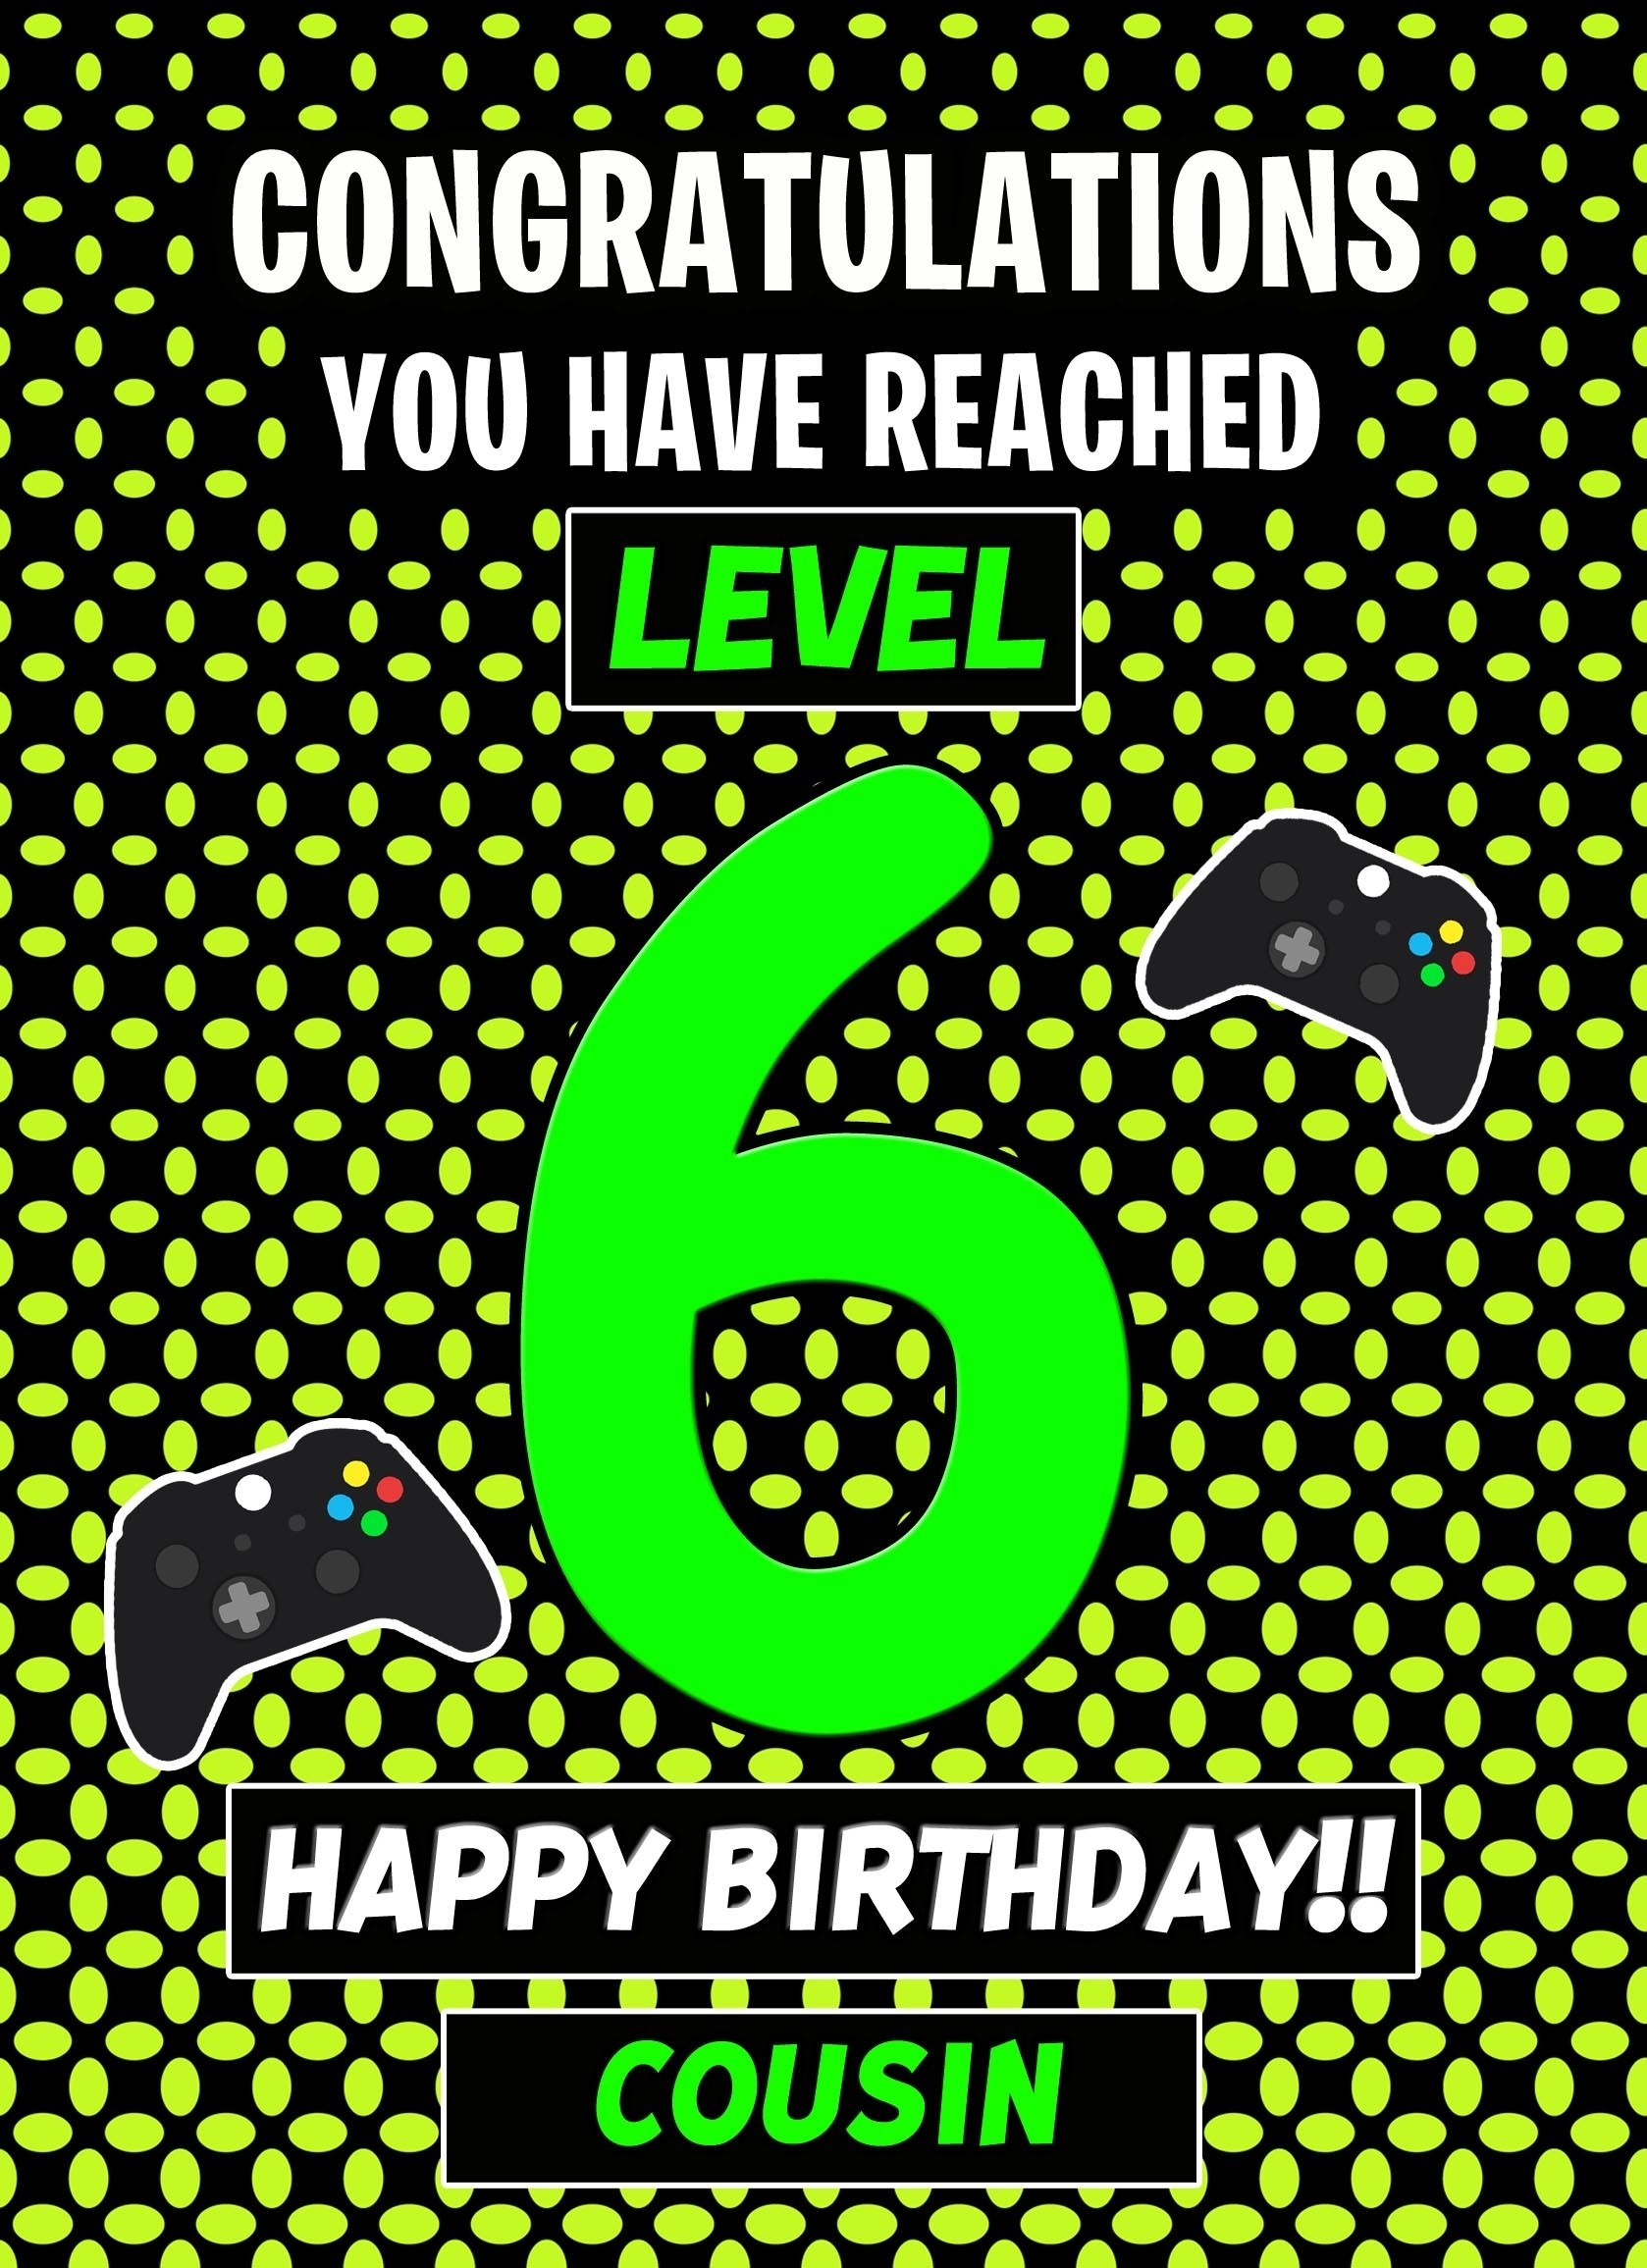 Cousin 6th Birthday Card (Level Up Gamer)